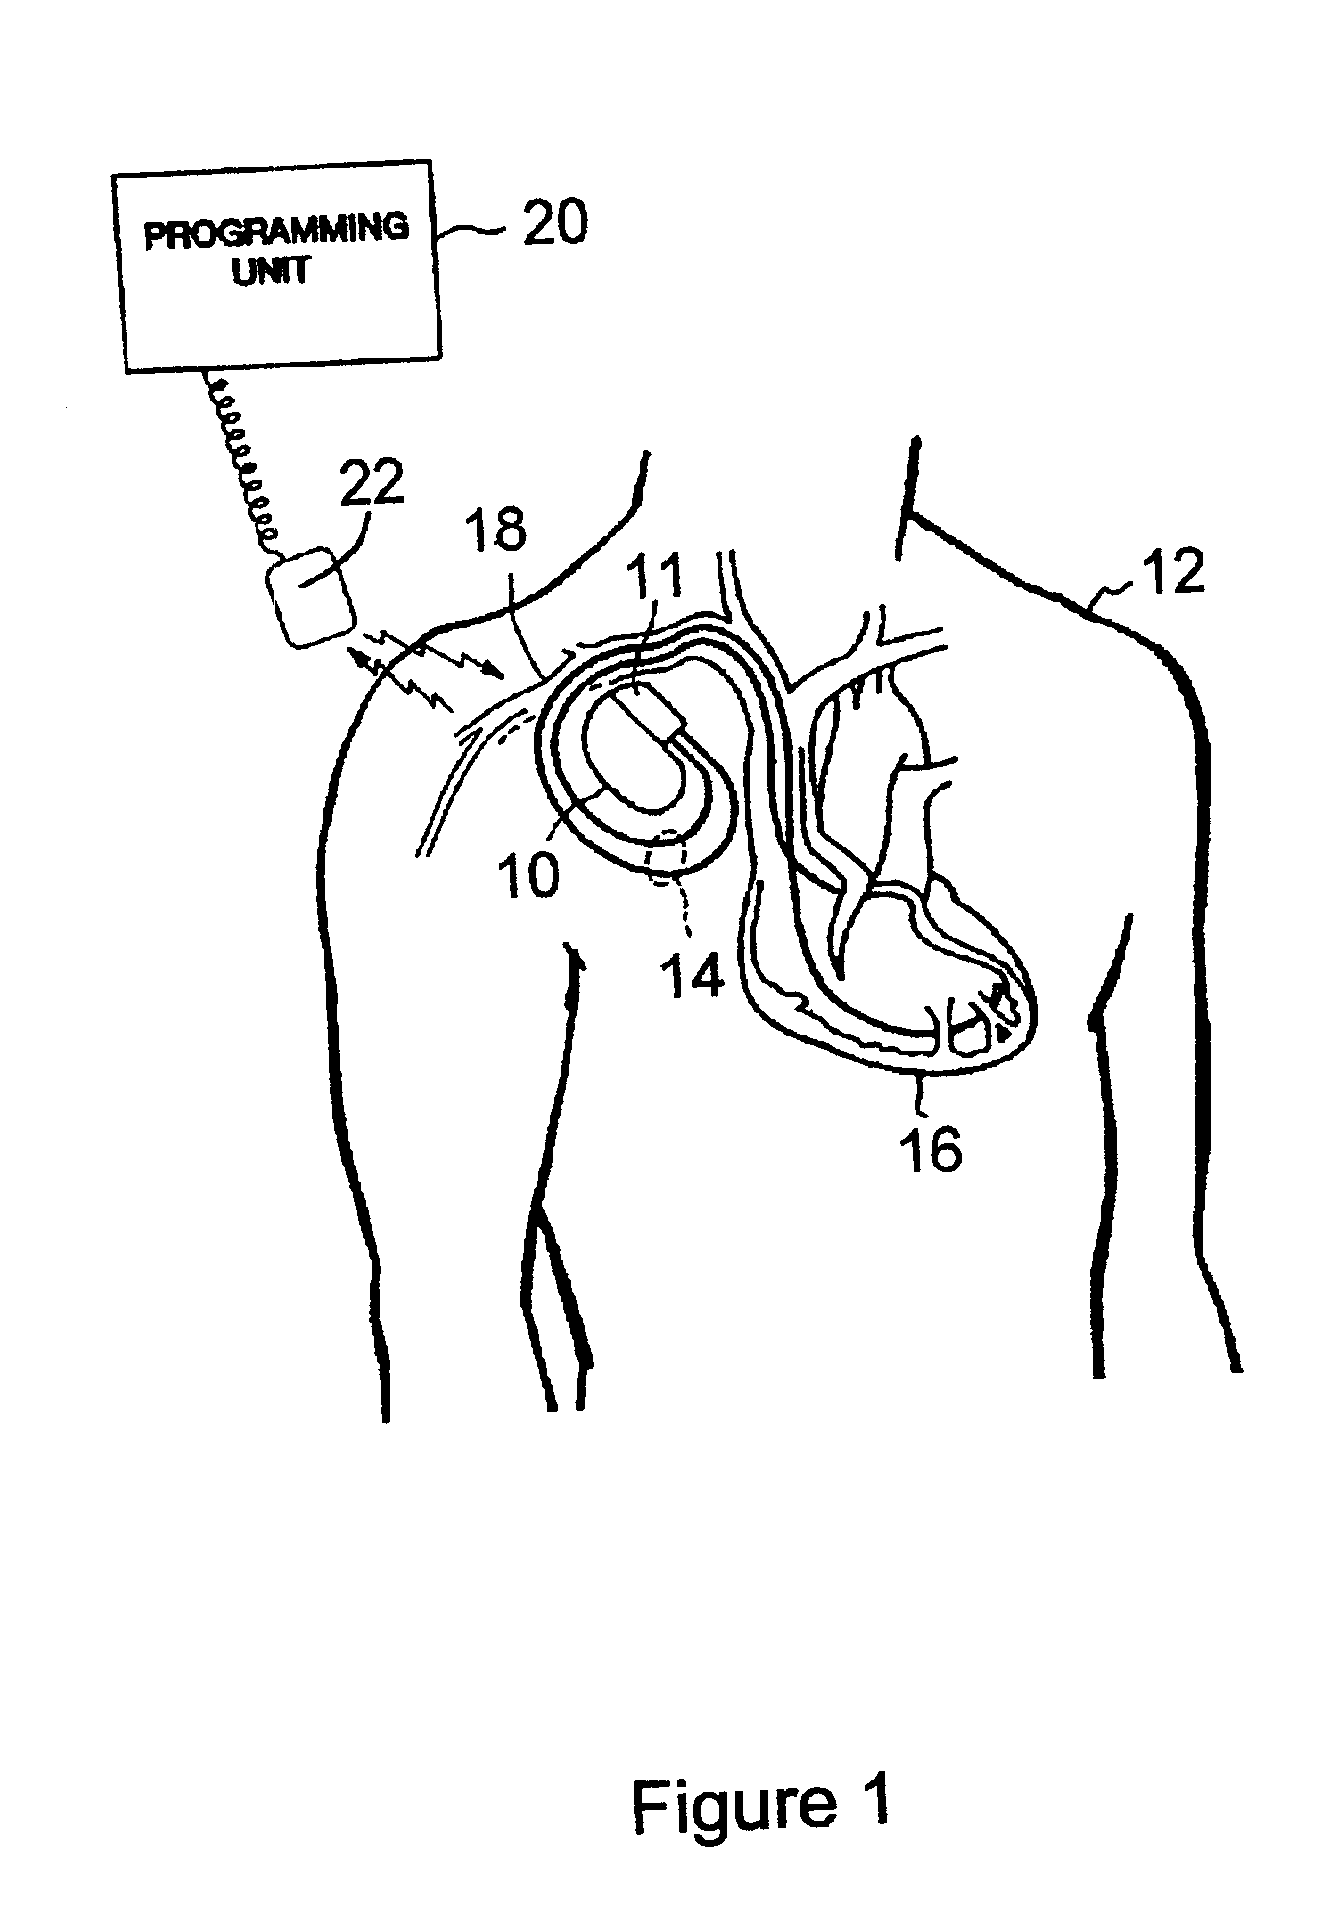 Implanted medical device telemetry using integrated thin film bulk acoustic resonator filtering